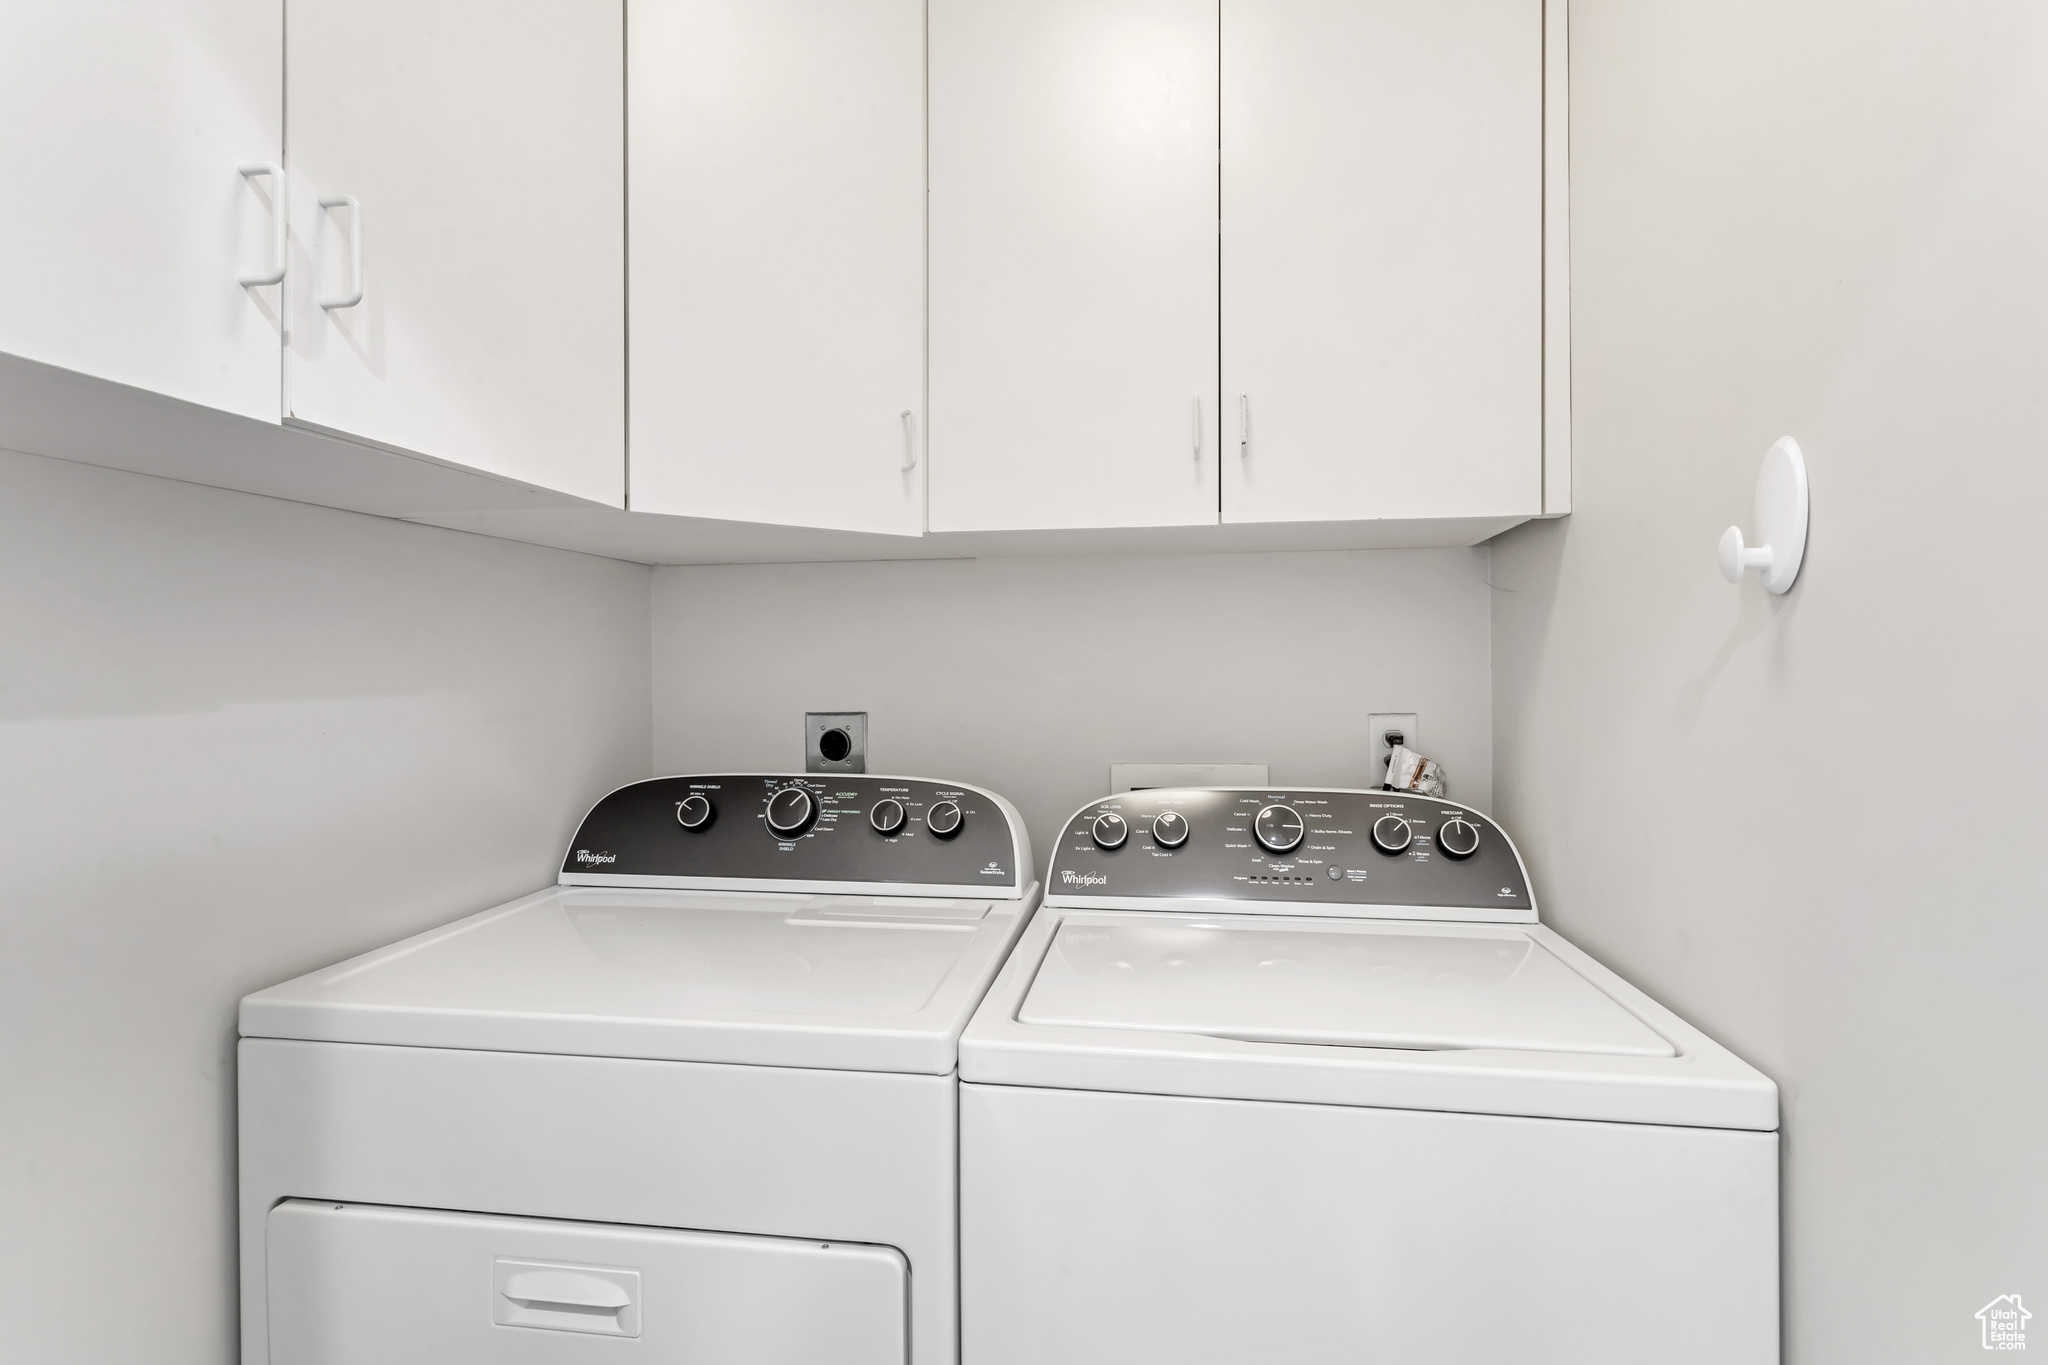 Washer and dryer are included